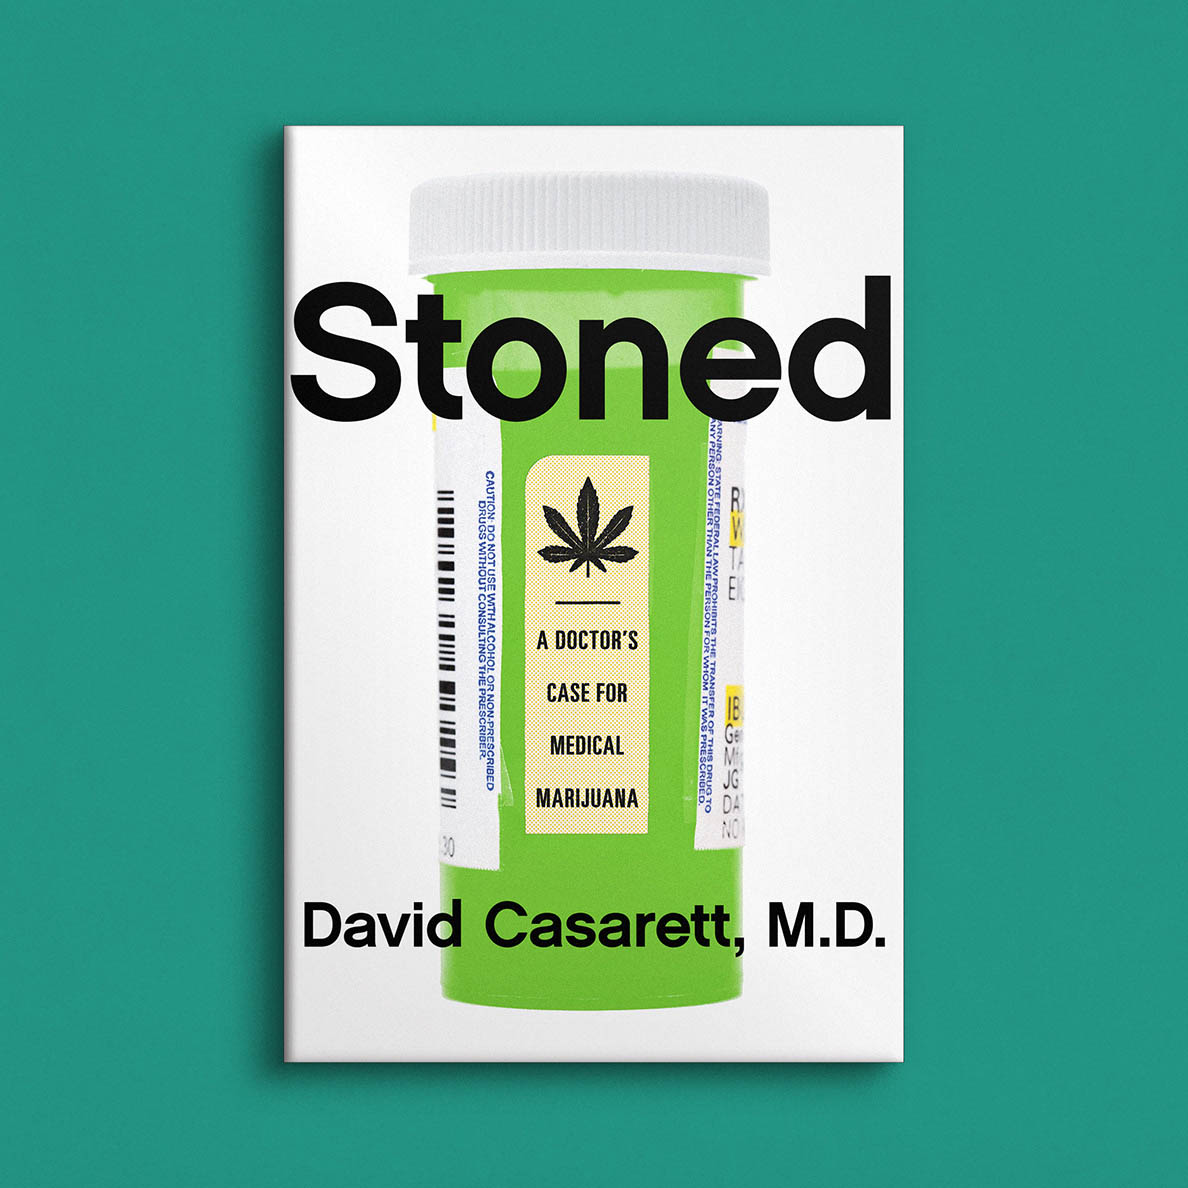 Stoned book cover